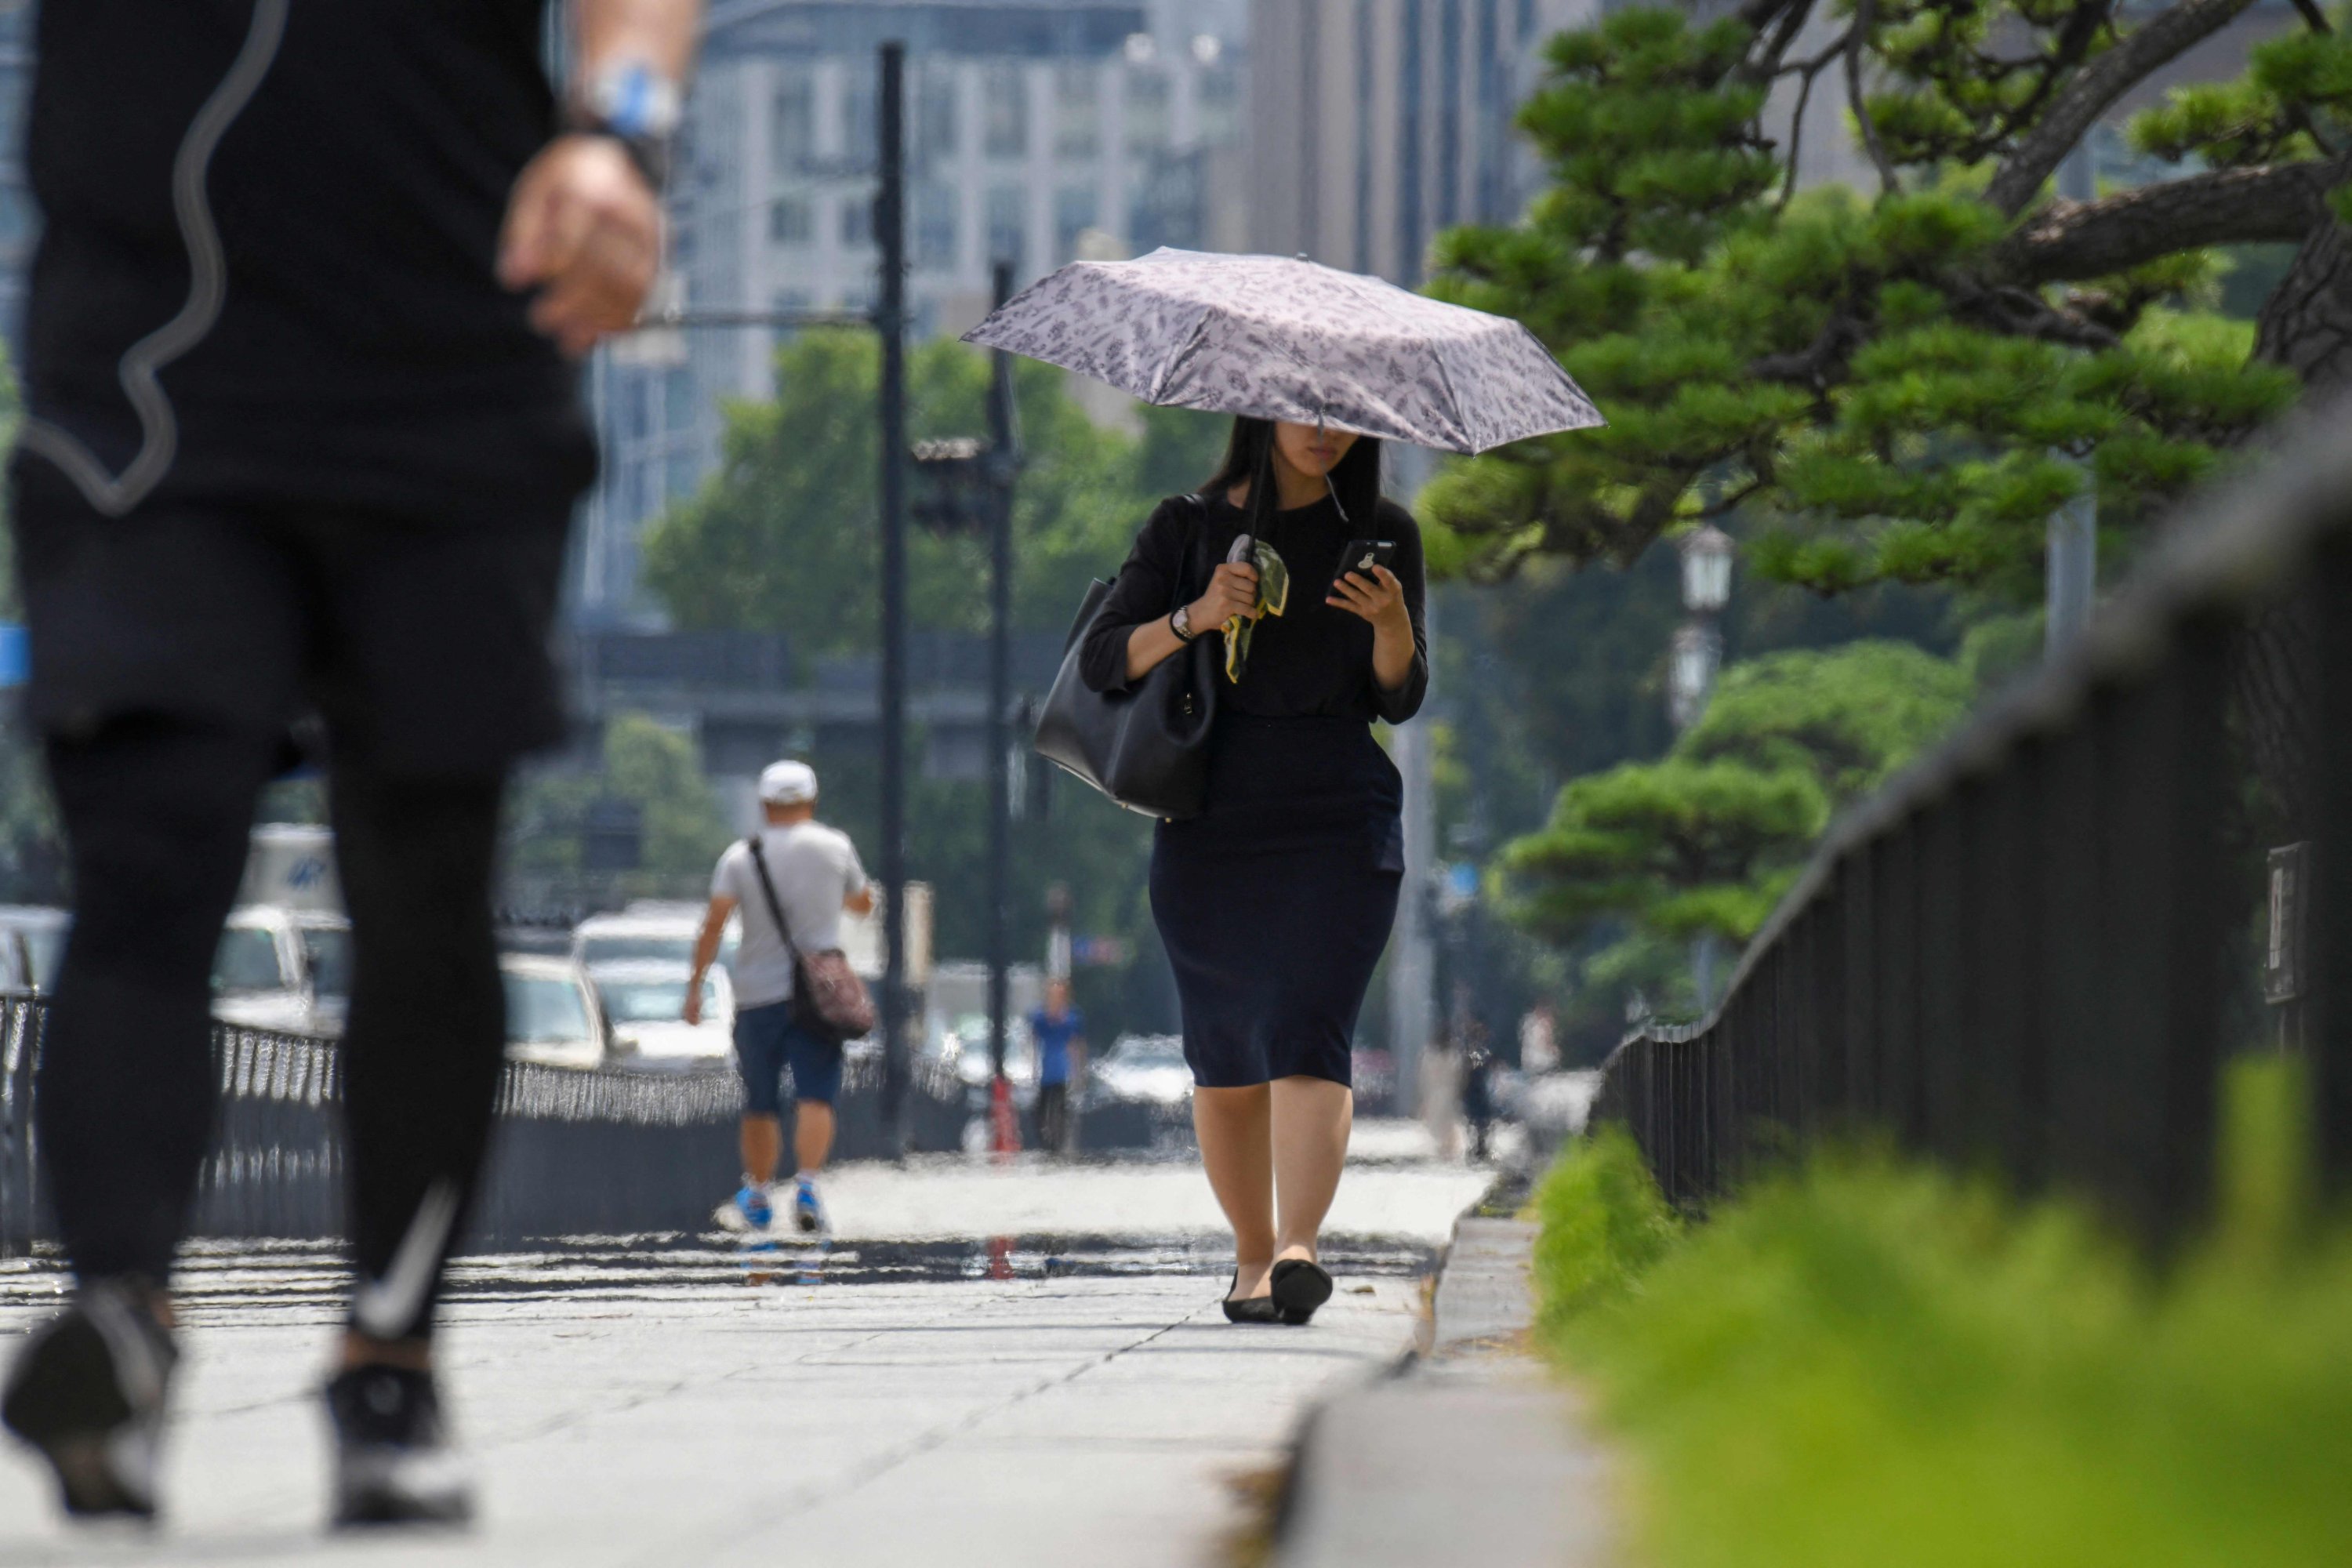 People walk on a sidewalk near the Imperial Palace during a heatwave in Tokyo on July 26, 2021. ( AFP Photo)